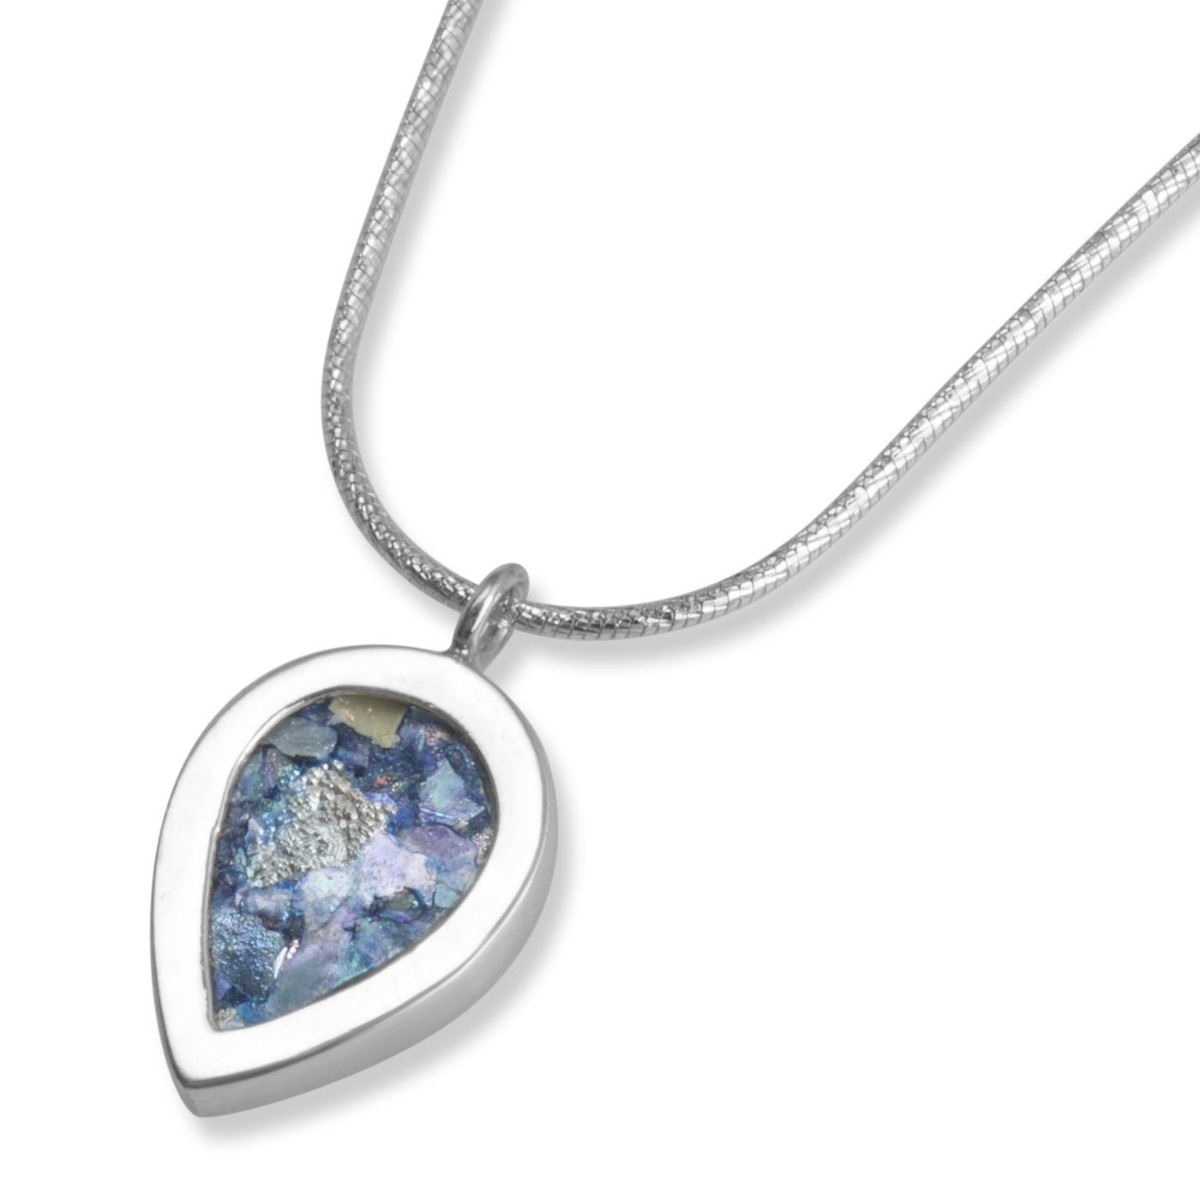 Sterling Silver and Roman Glass Classy Leaf Necklace  - 1